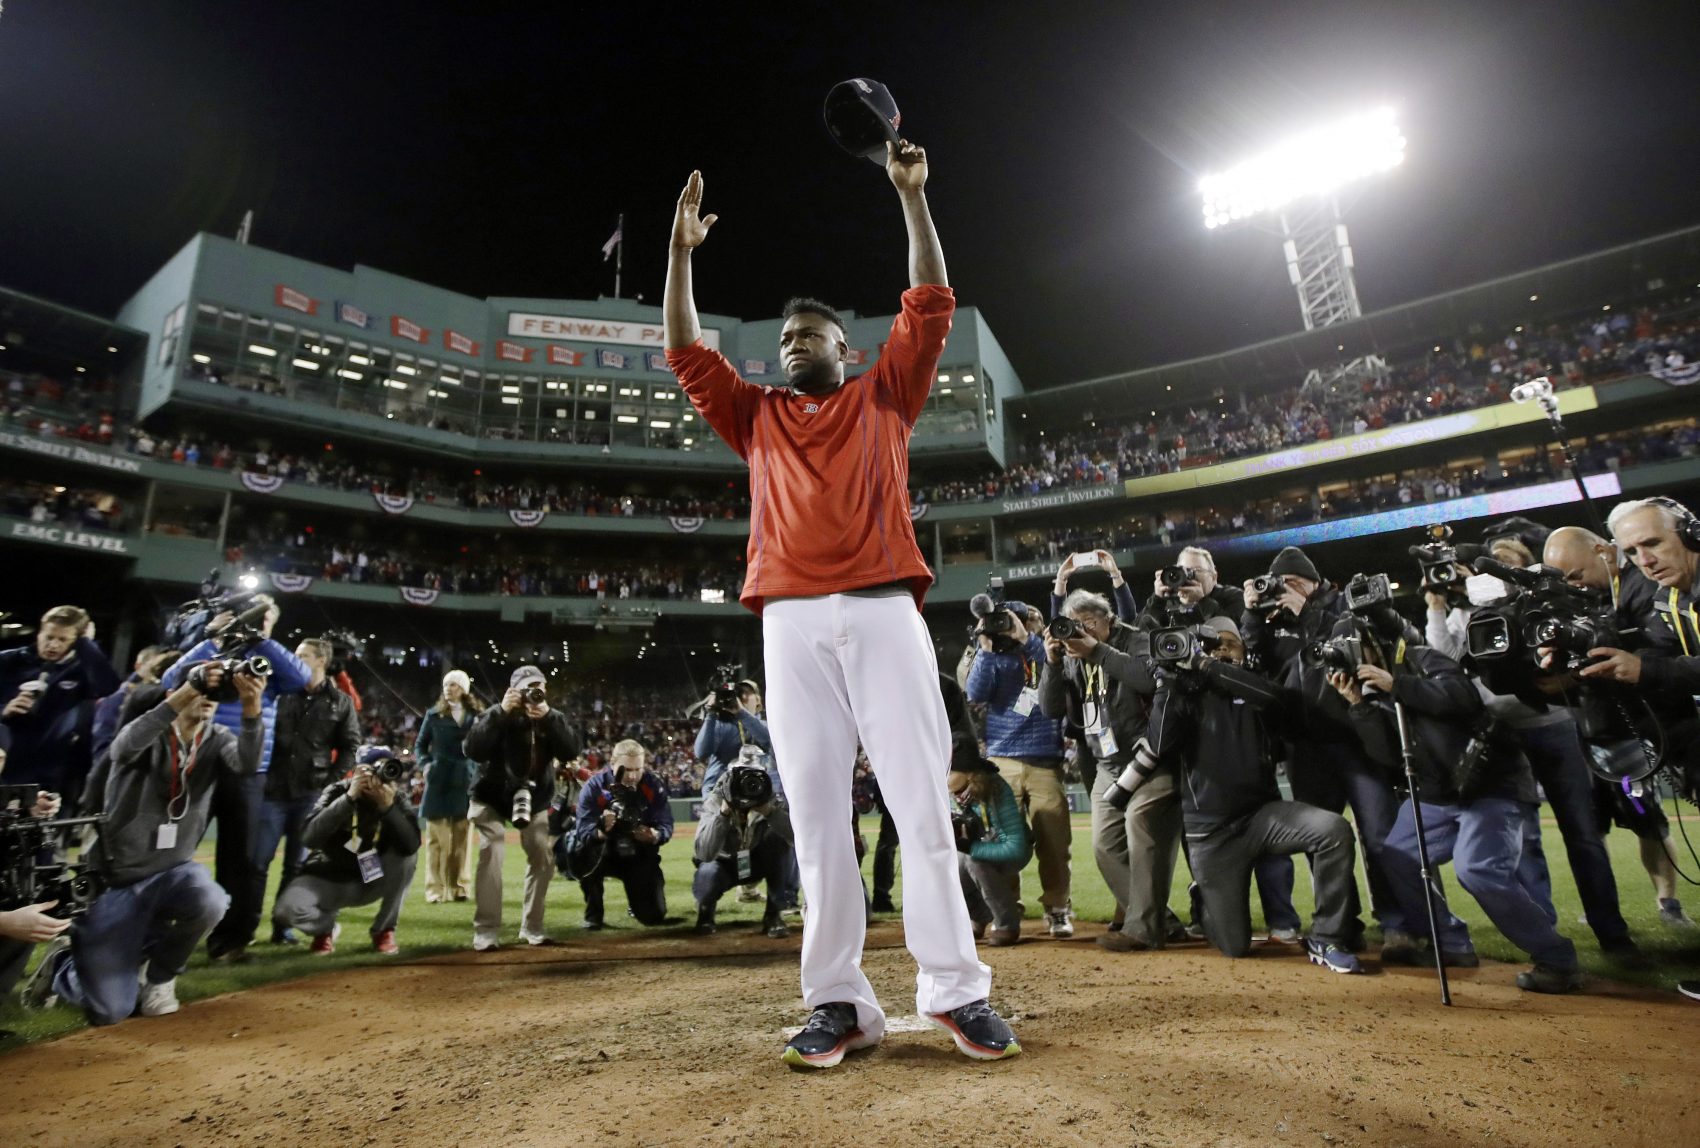 After 20 years, David Ortiz leaving on his own terms